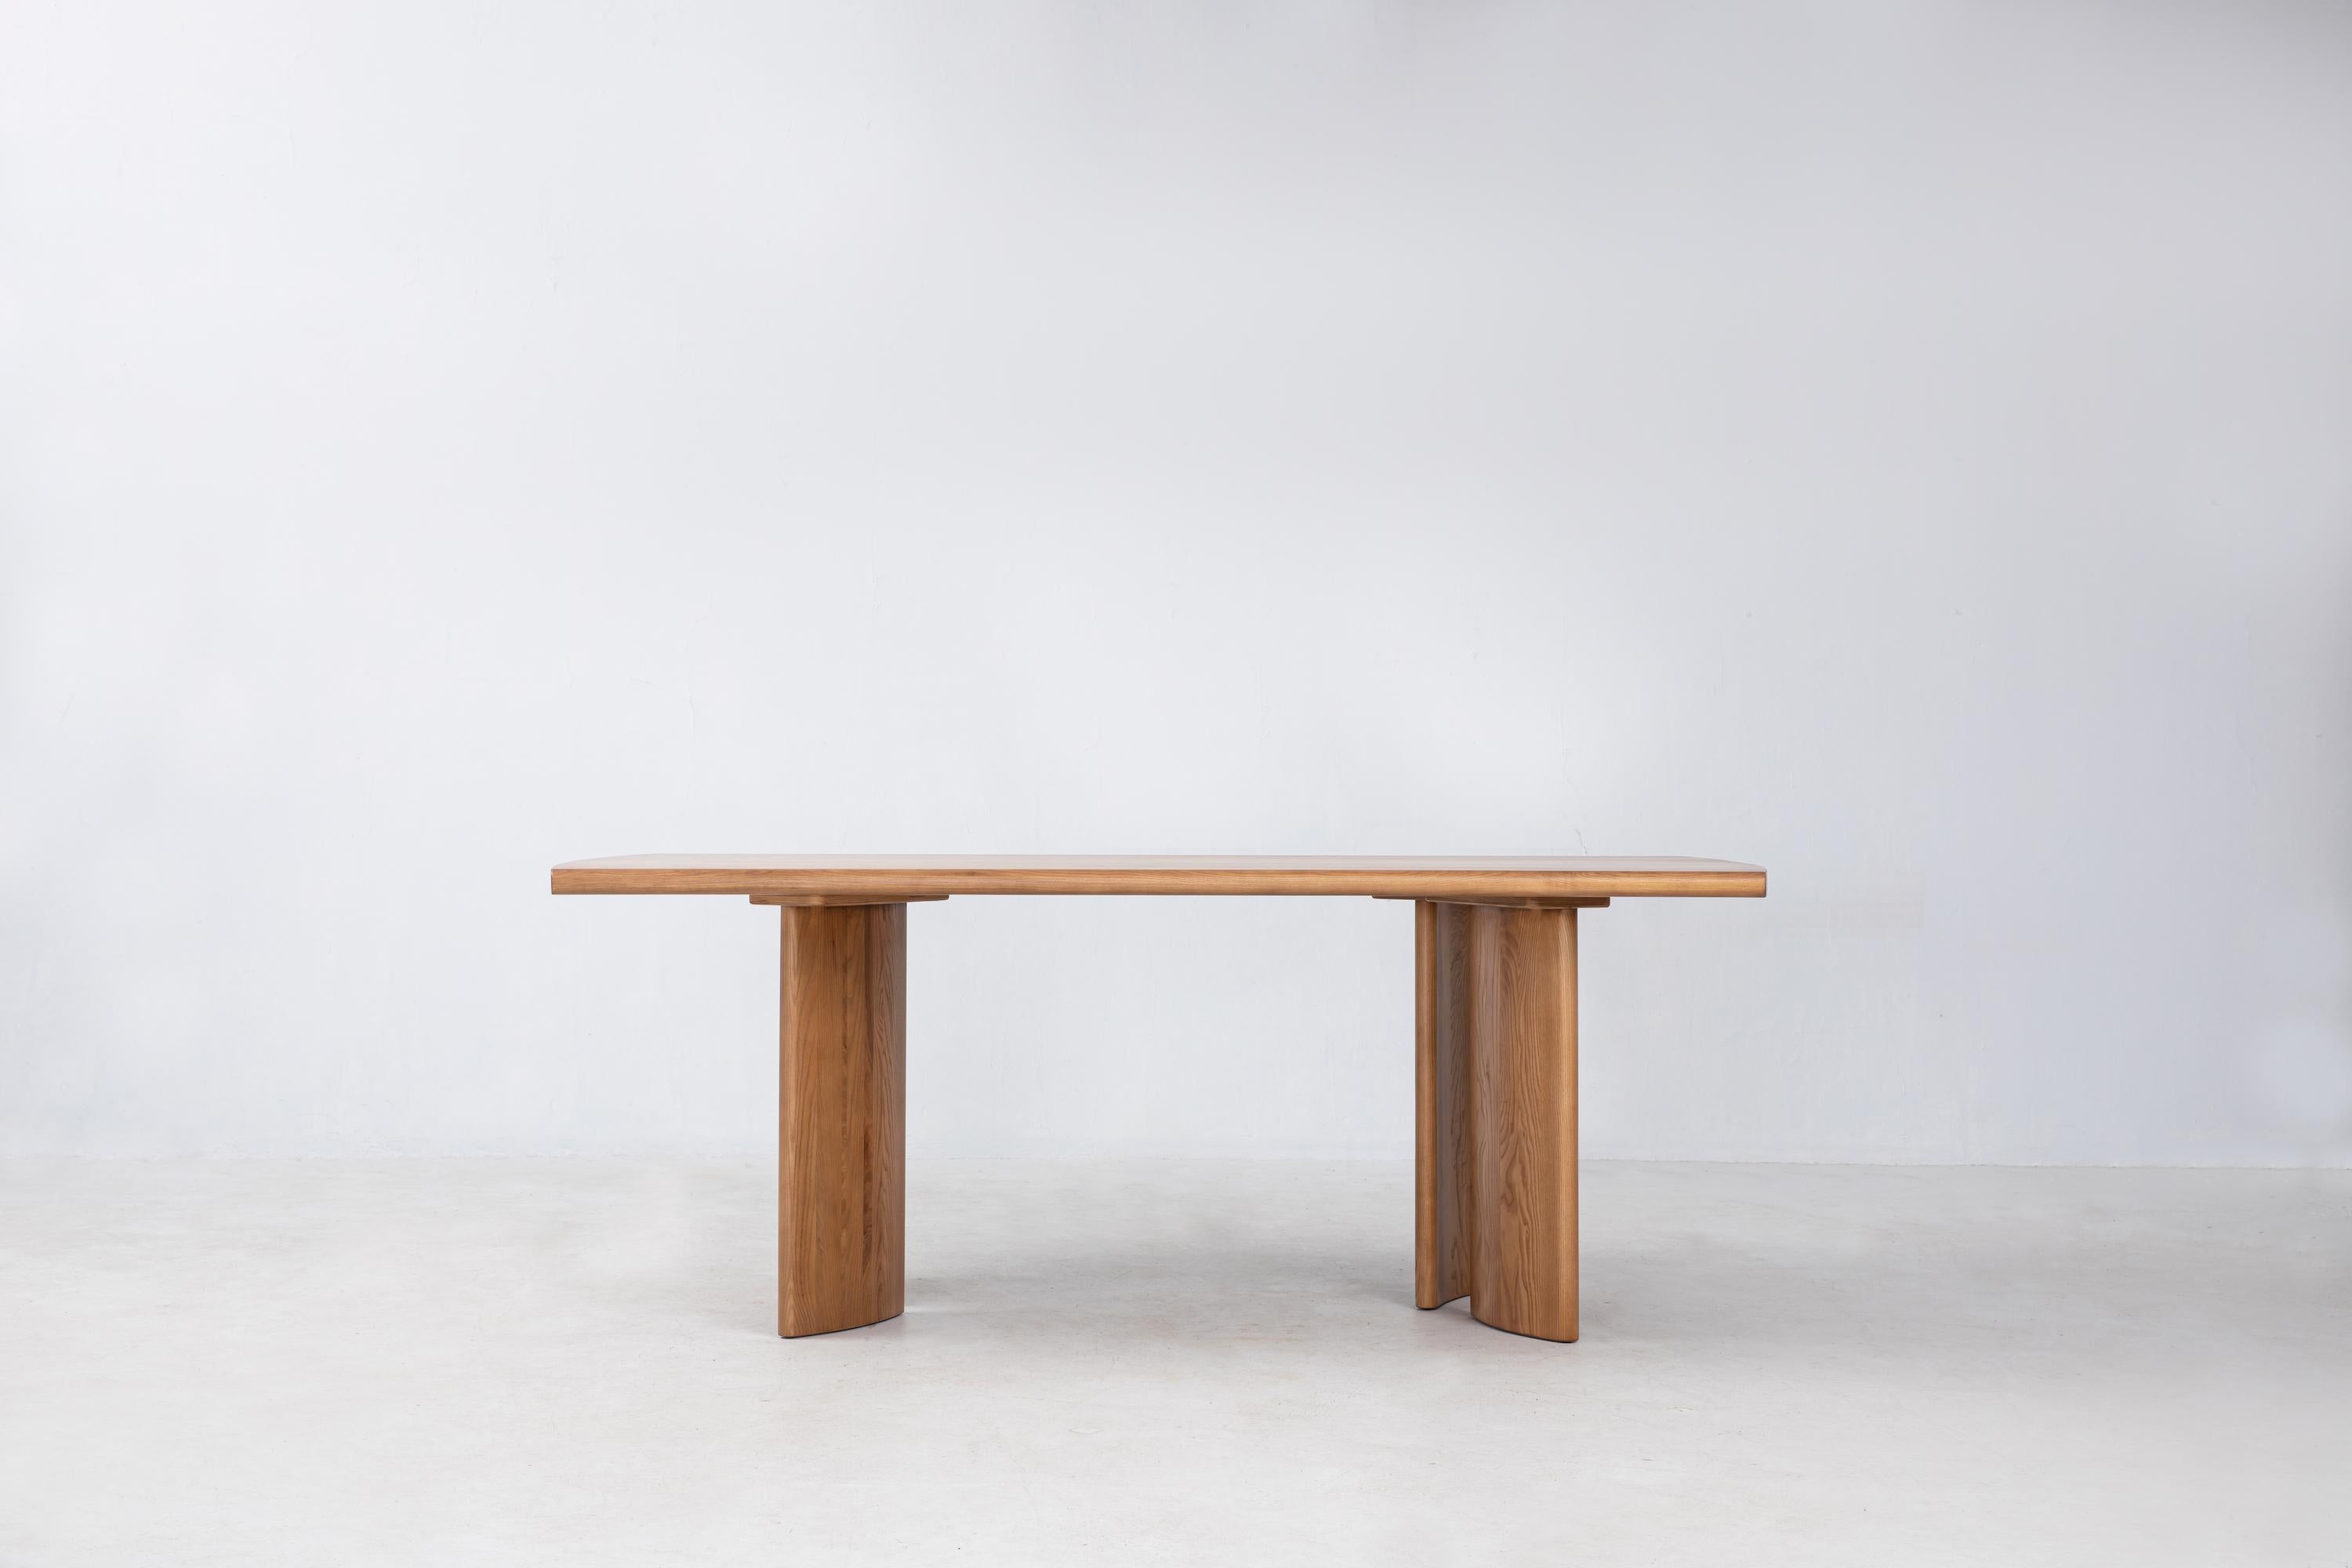 Sun at Six is a contemporary furniture design studio that works with traditional Chinese joinery masters to handcraft our pieces using traditional joinery. The crest table is our statement, large dining table. Legs detached for shipping.

Great